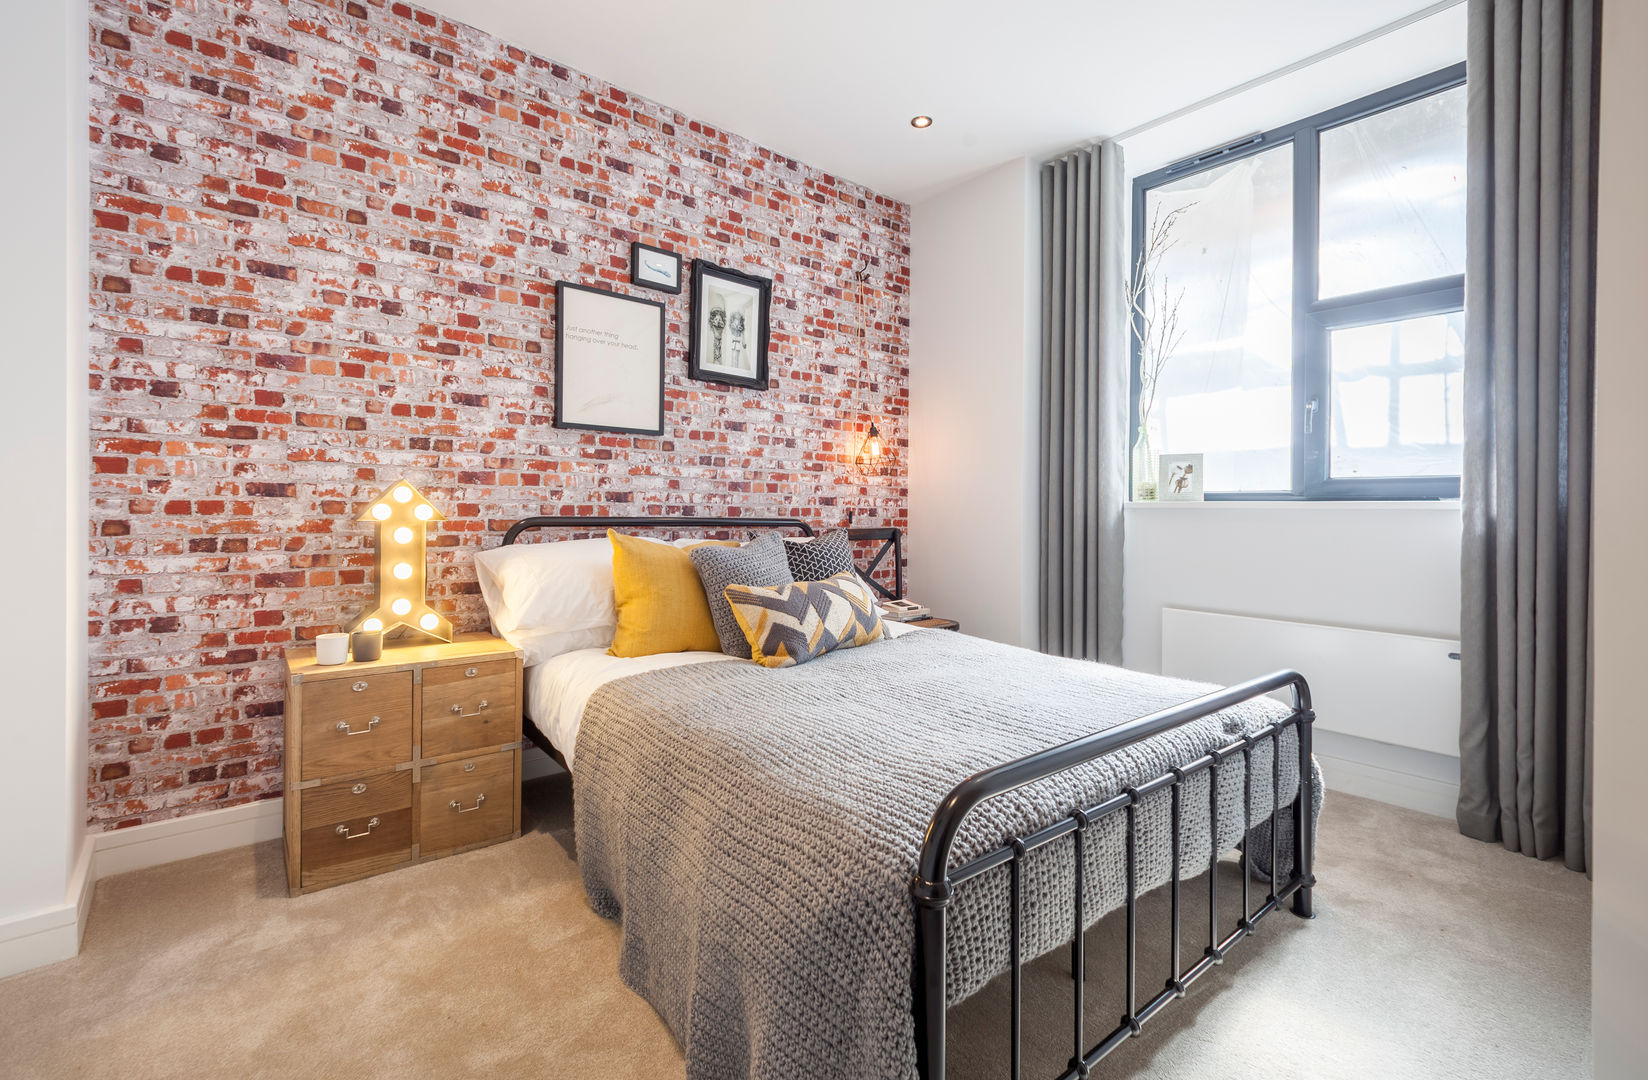 Bedroom Jigsaw Interior Architecture & Design industrial,bedroom,city centre,small space,exposed brick,black metal bed